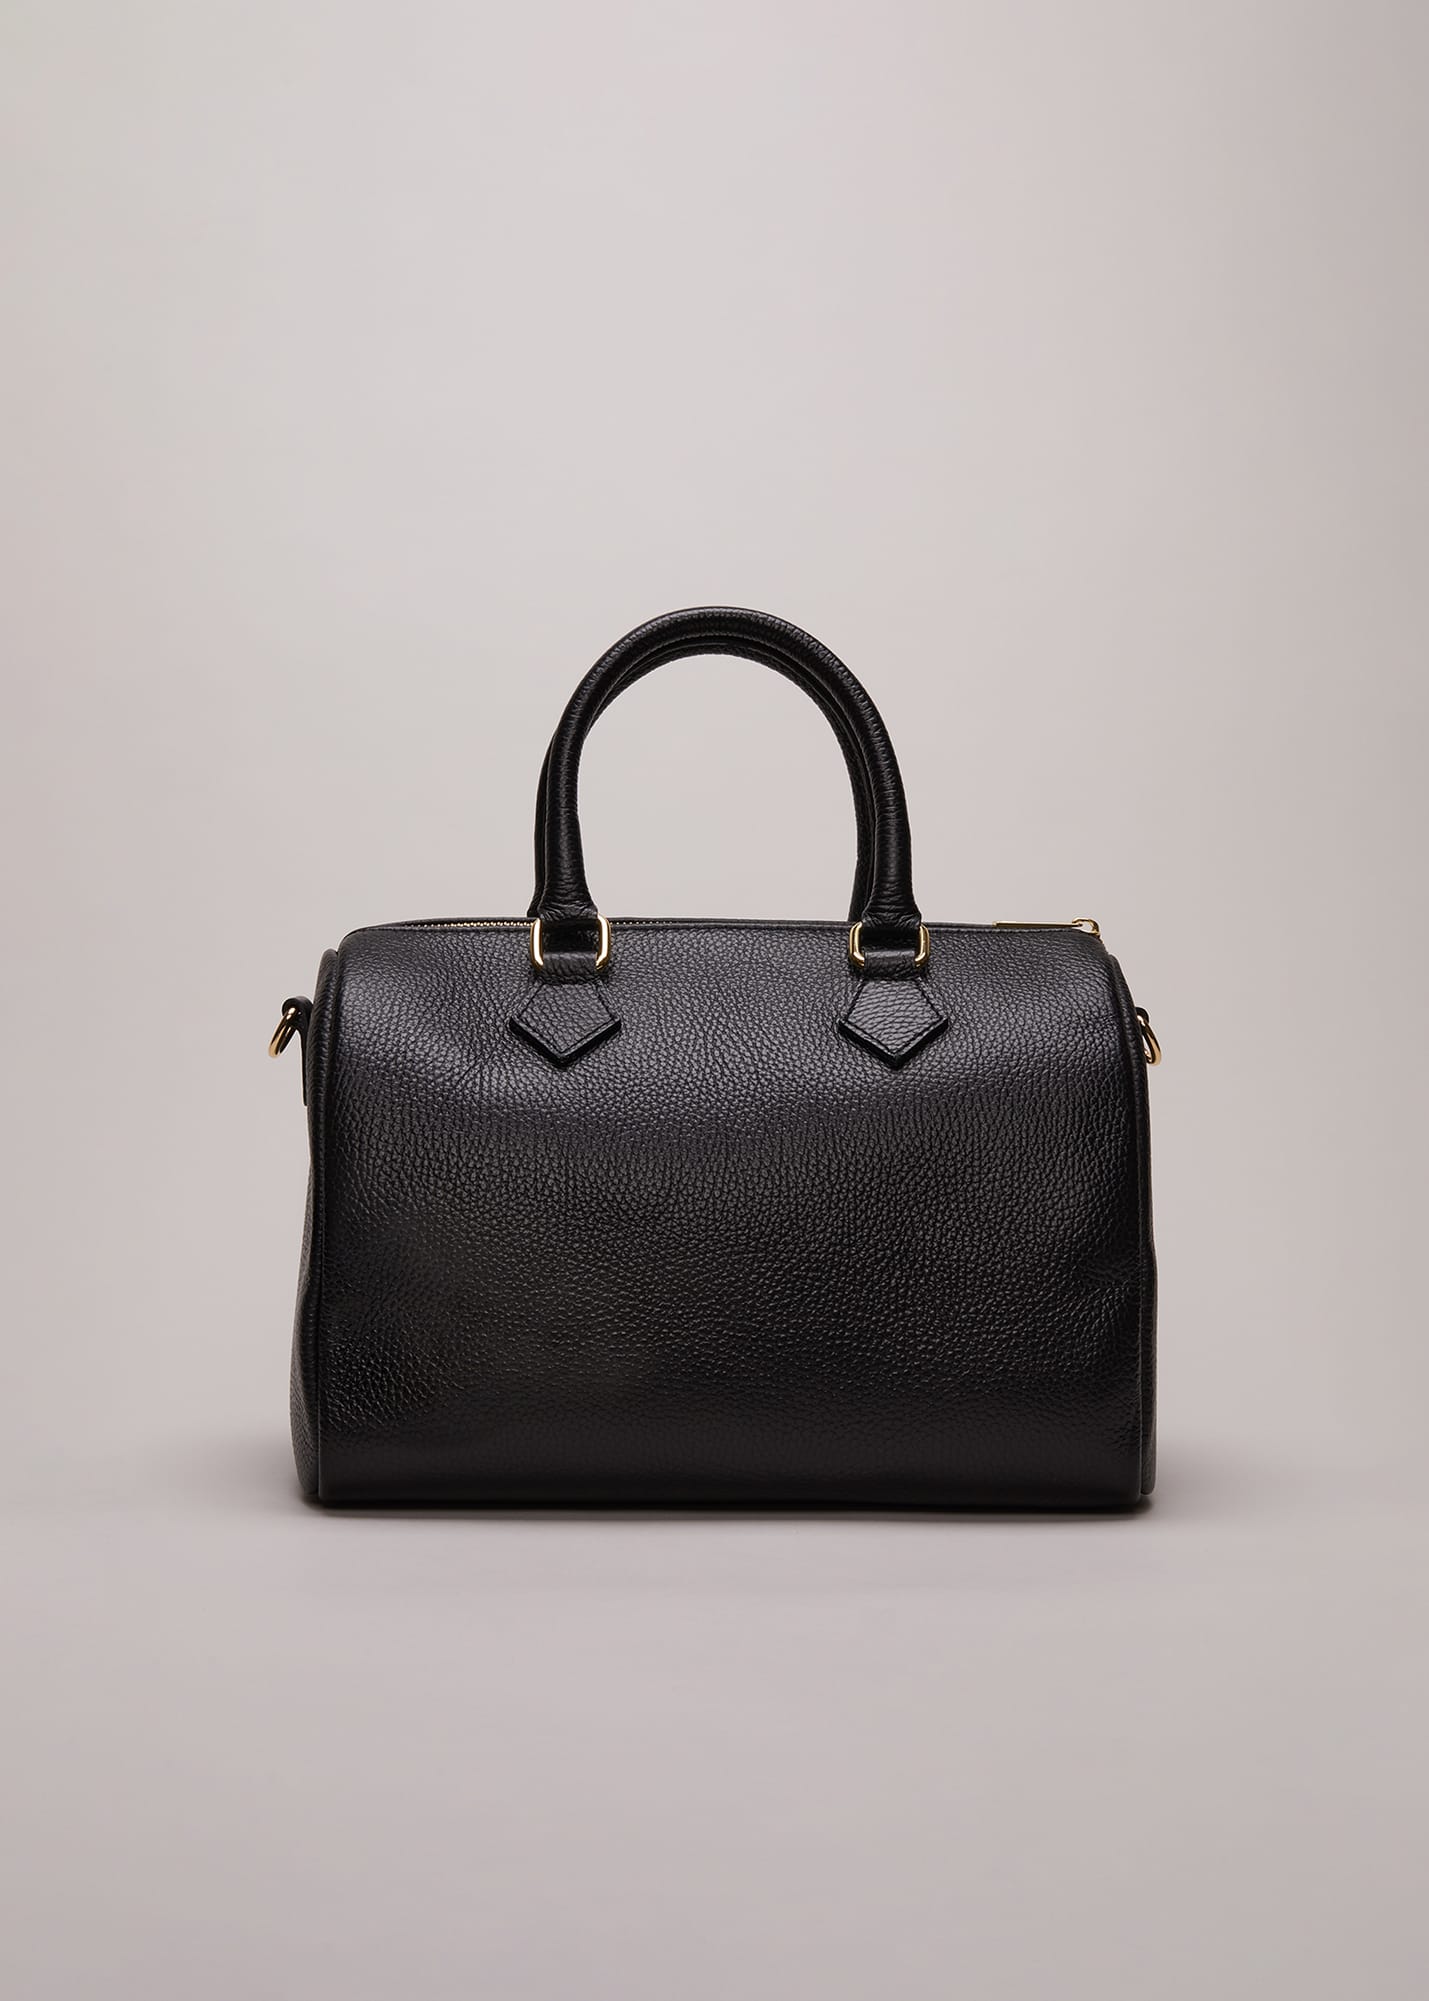 Phase Eight Women's Black Leather Bowling Bag